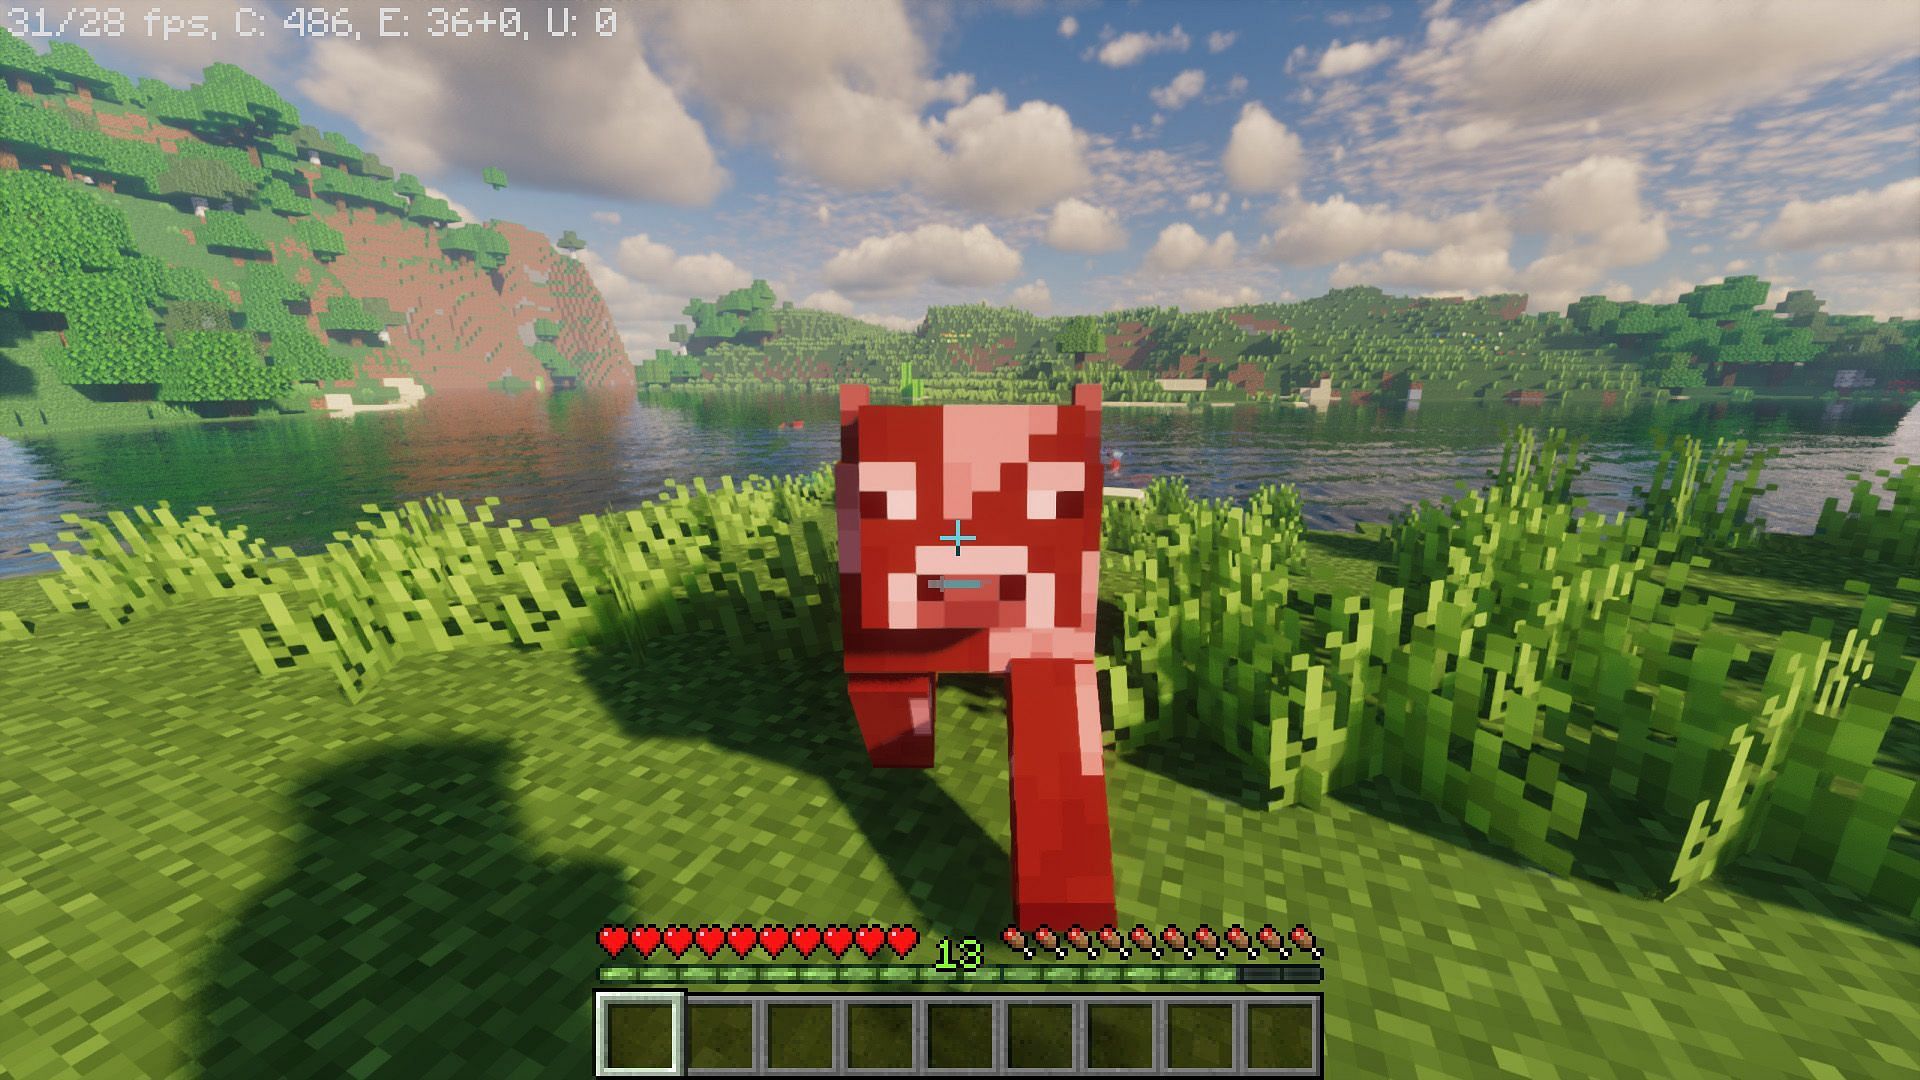 Tap any mob while sprinting, and you can retain your hunger (Image via Mojang)